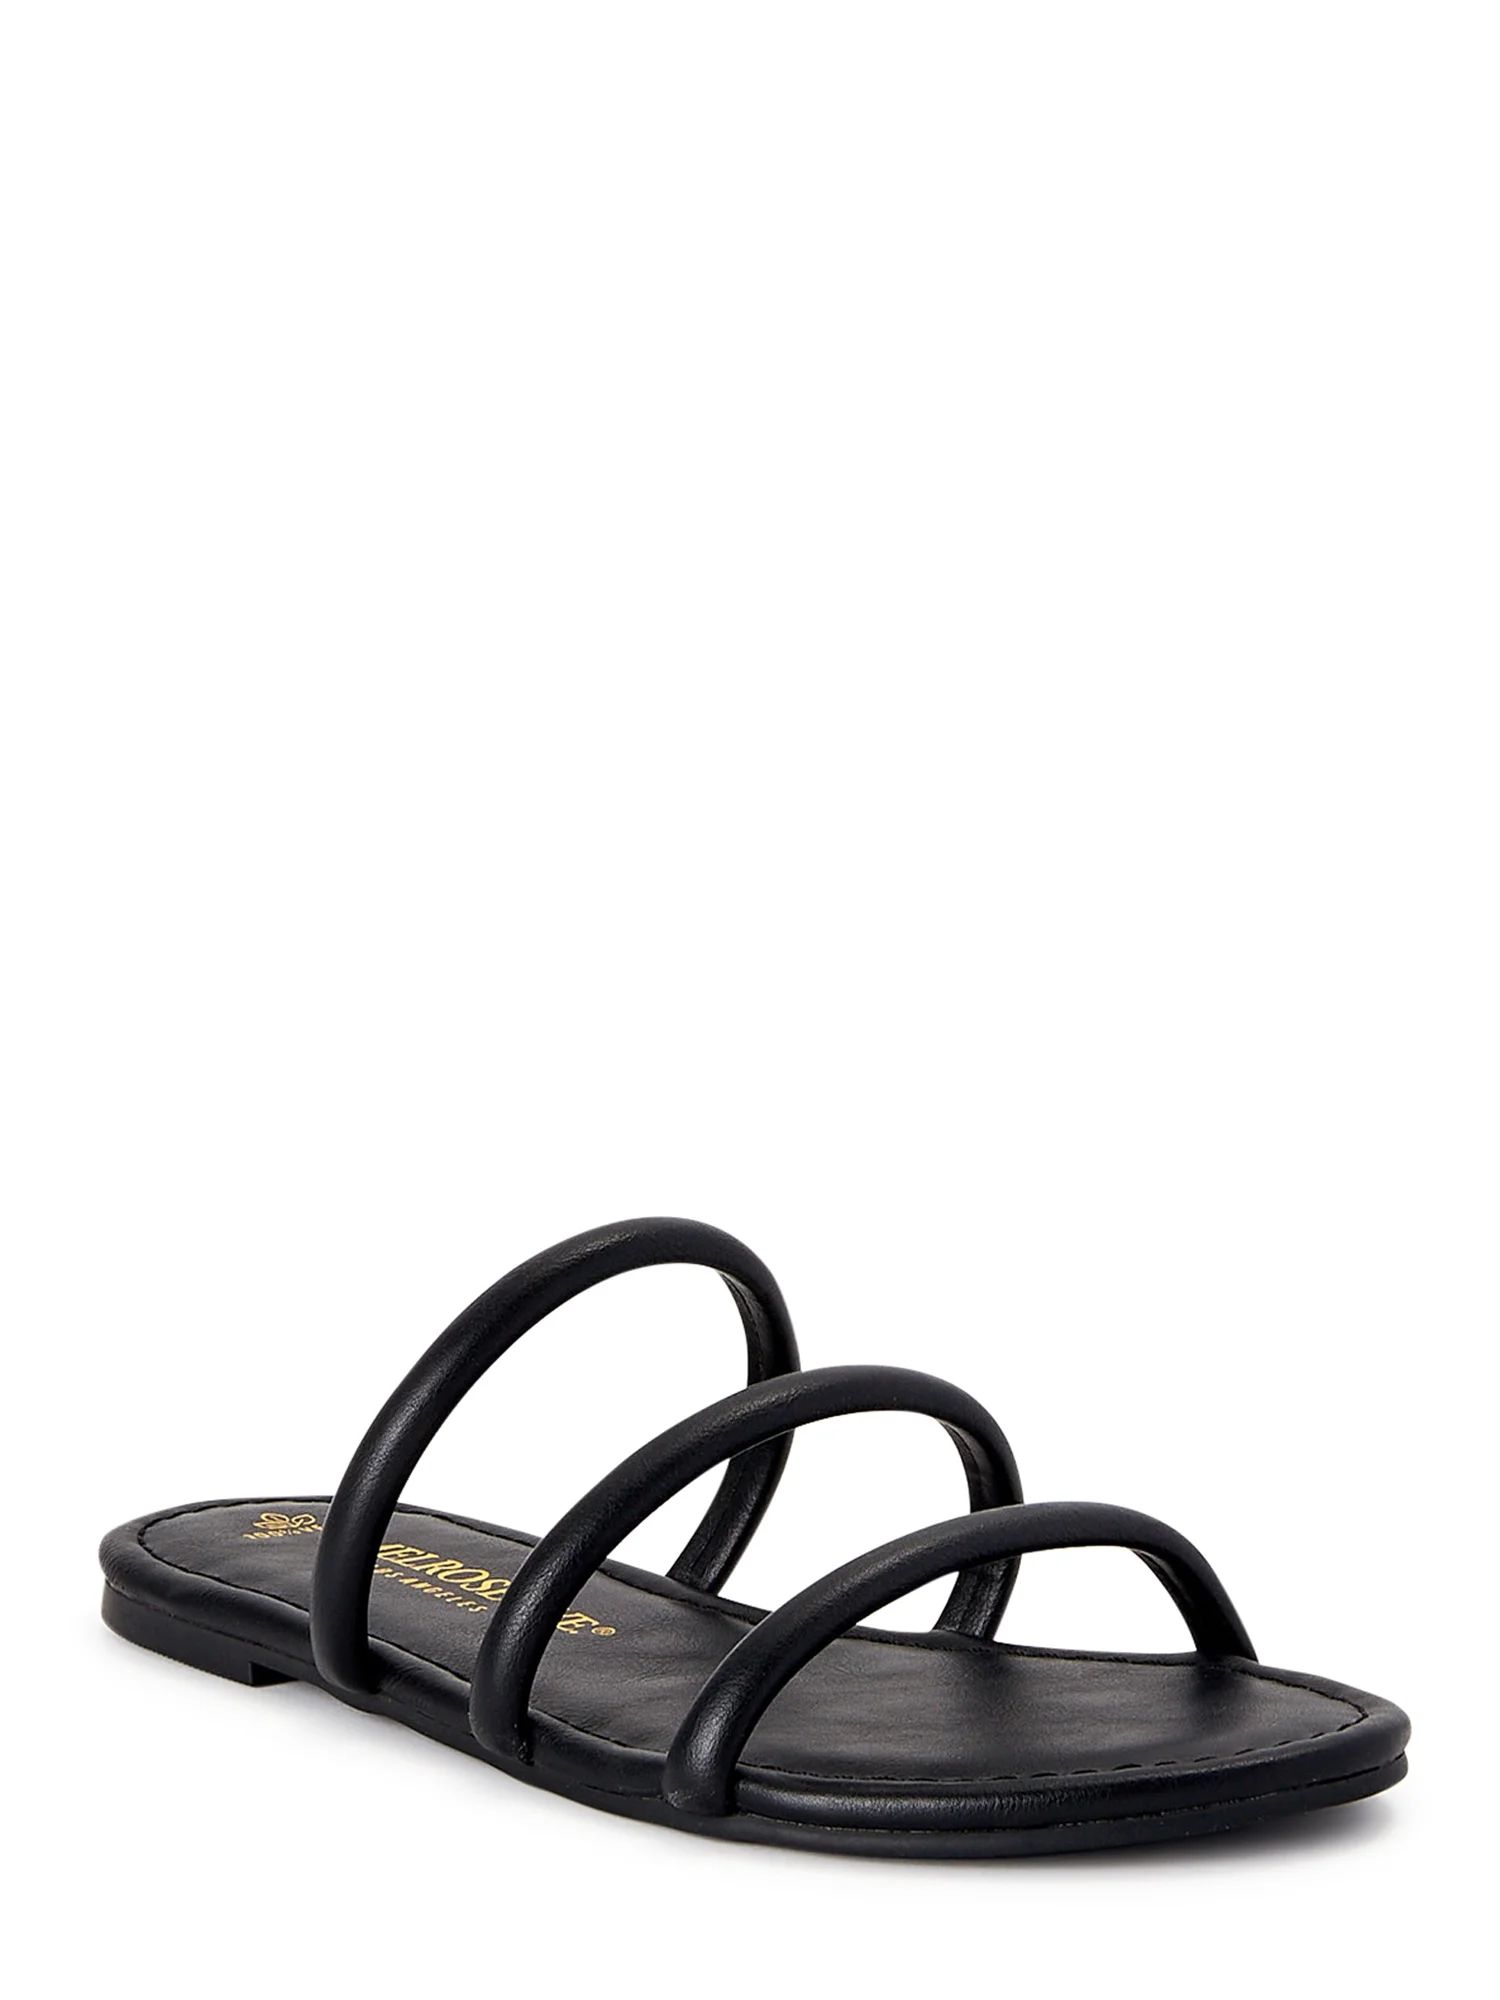 Melrose Ave Women's Faux Leather Three Strap Sandals | Walmart (US)